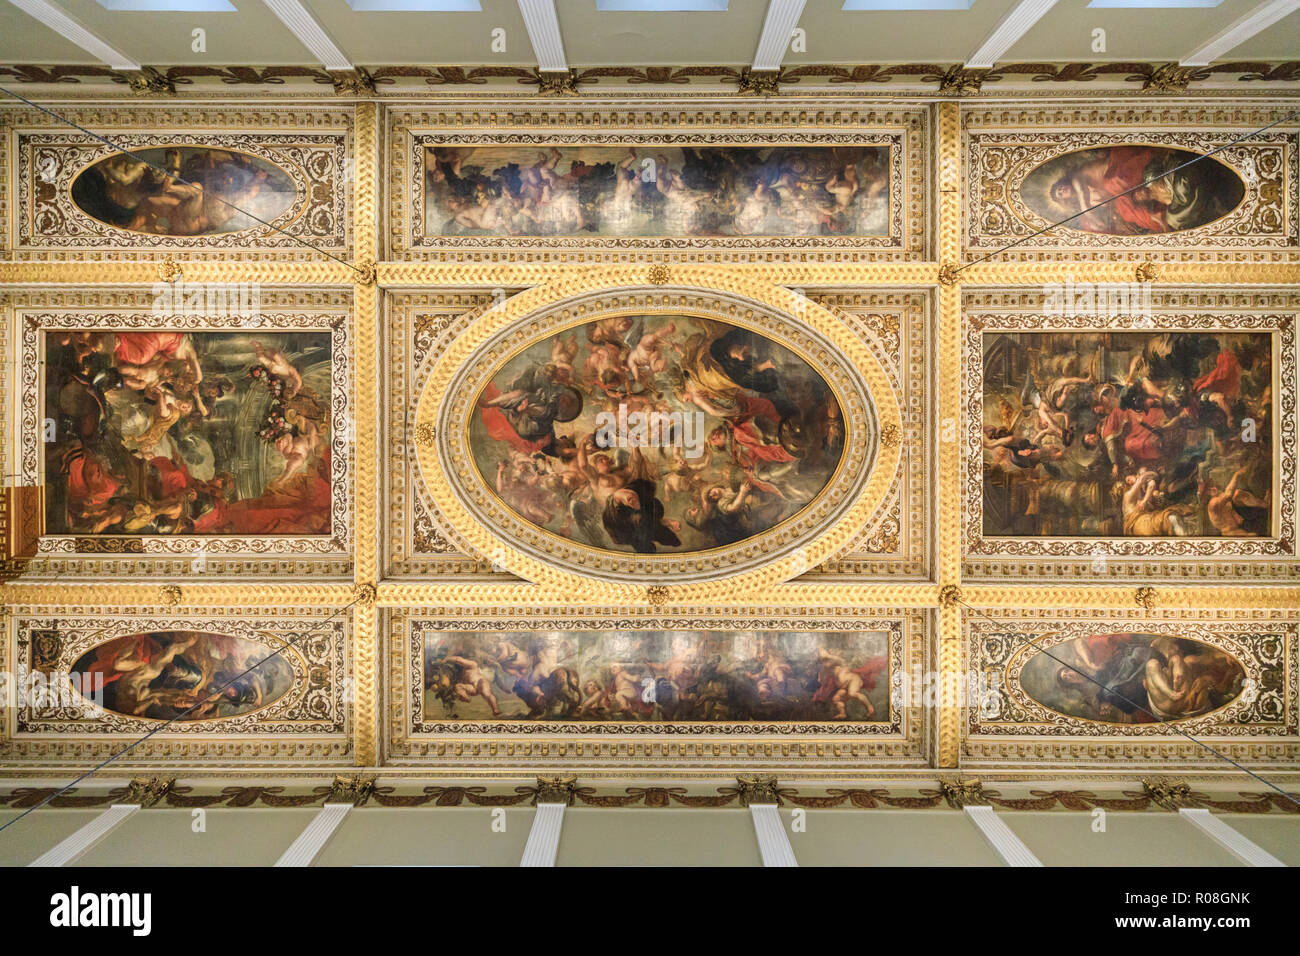 Banqueting Hall ceiling by Peter Paul Rubens with The Apotheosis of James I, the centerpiece painting, Banqueting House, Whitehall, London, UK Stock Photo